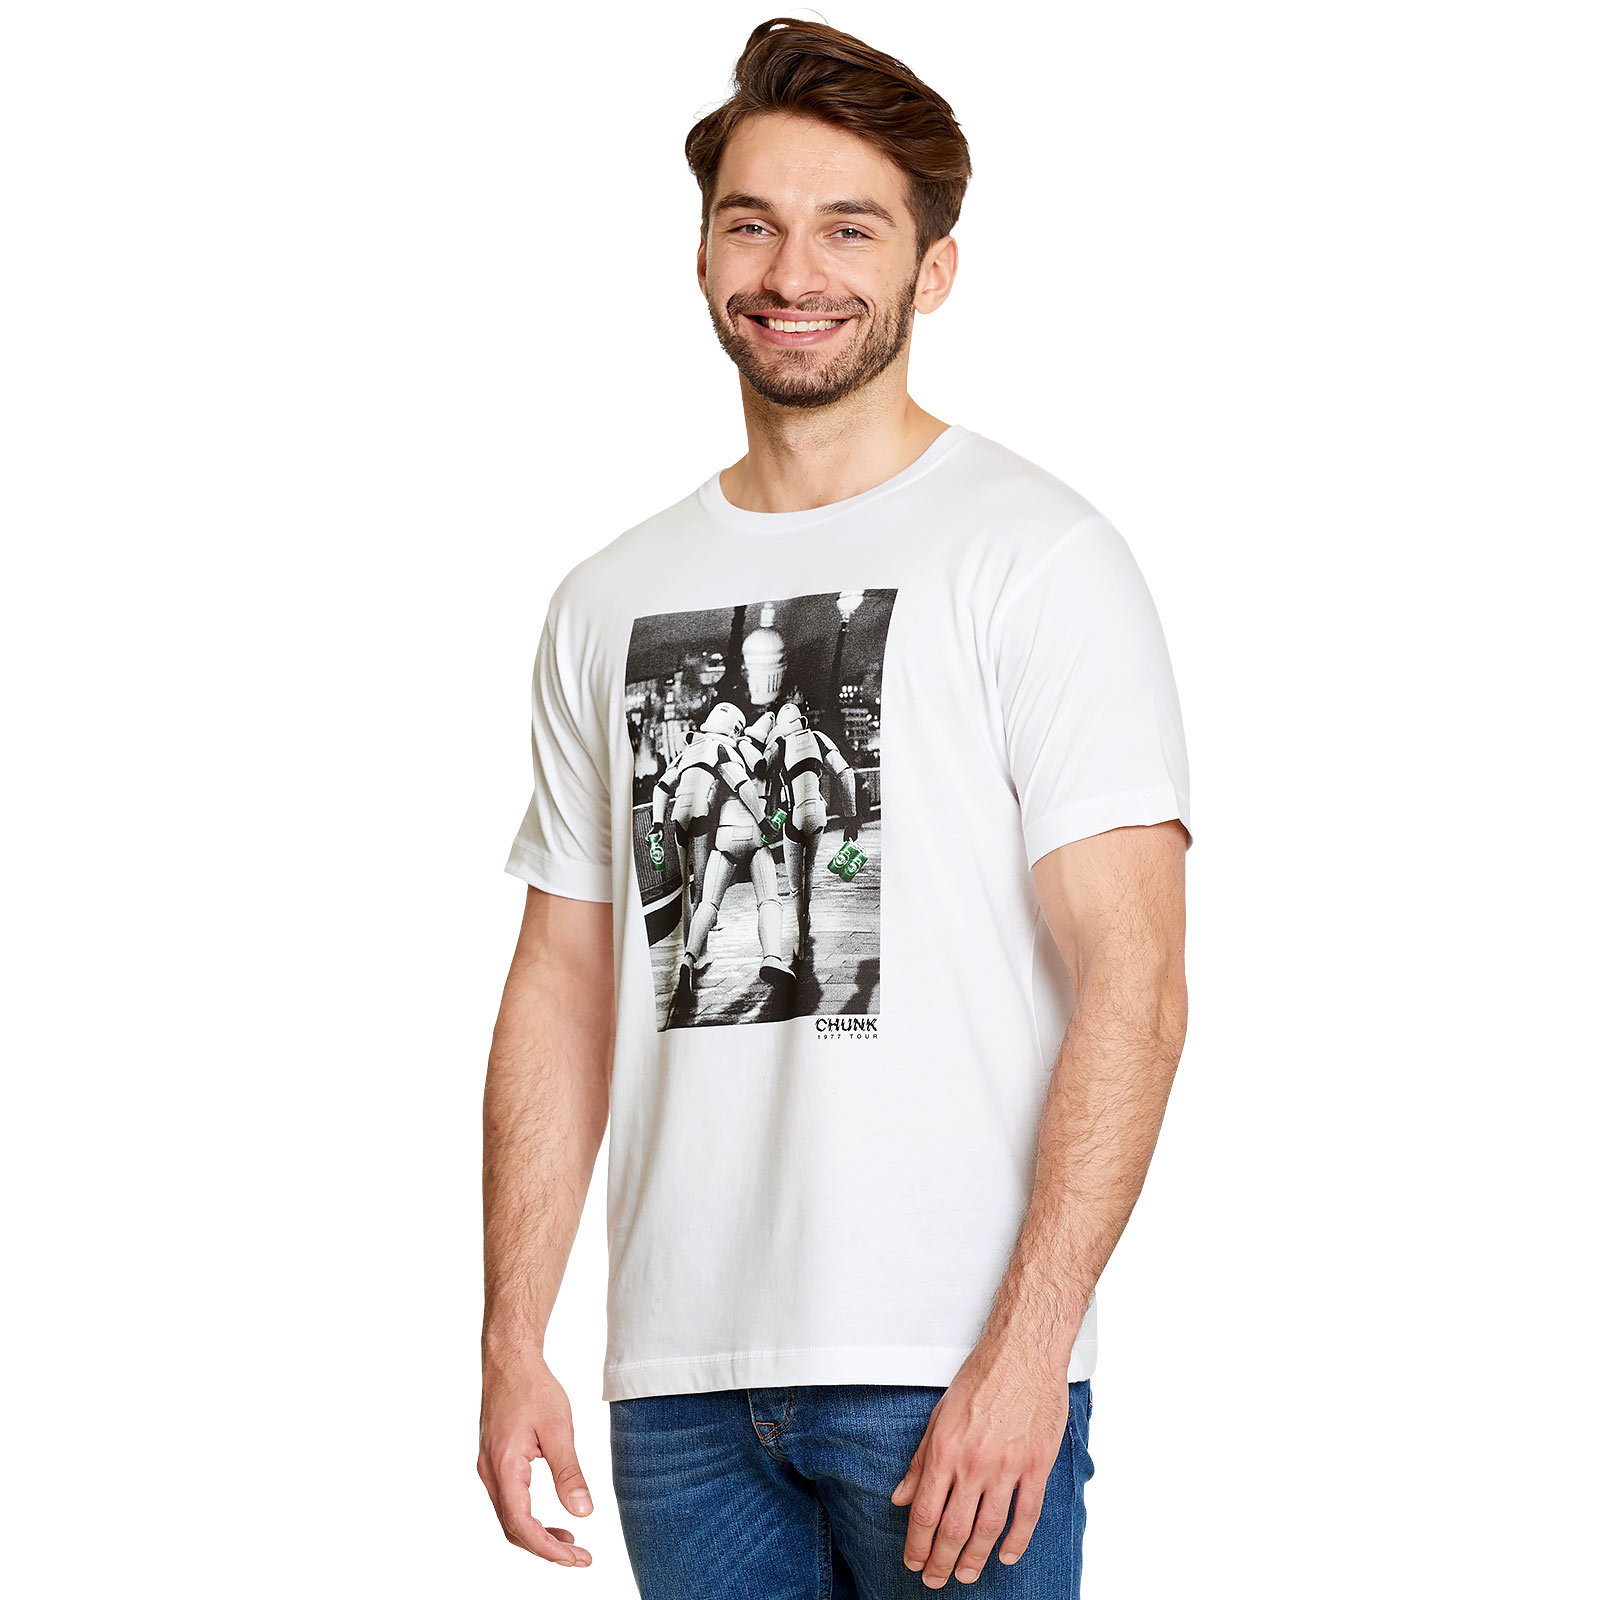 Imperial Fighters at Night T-Shirt für Star Wars Fans